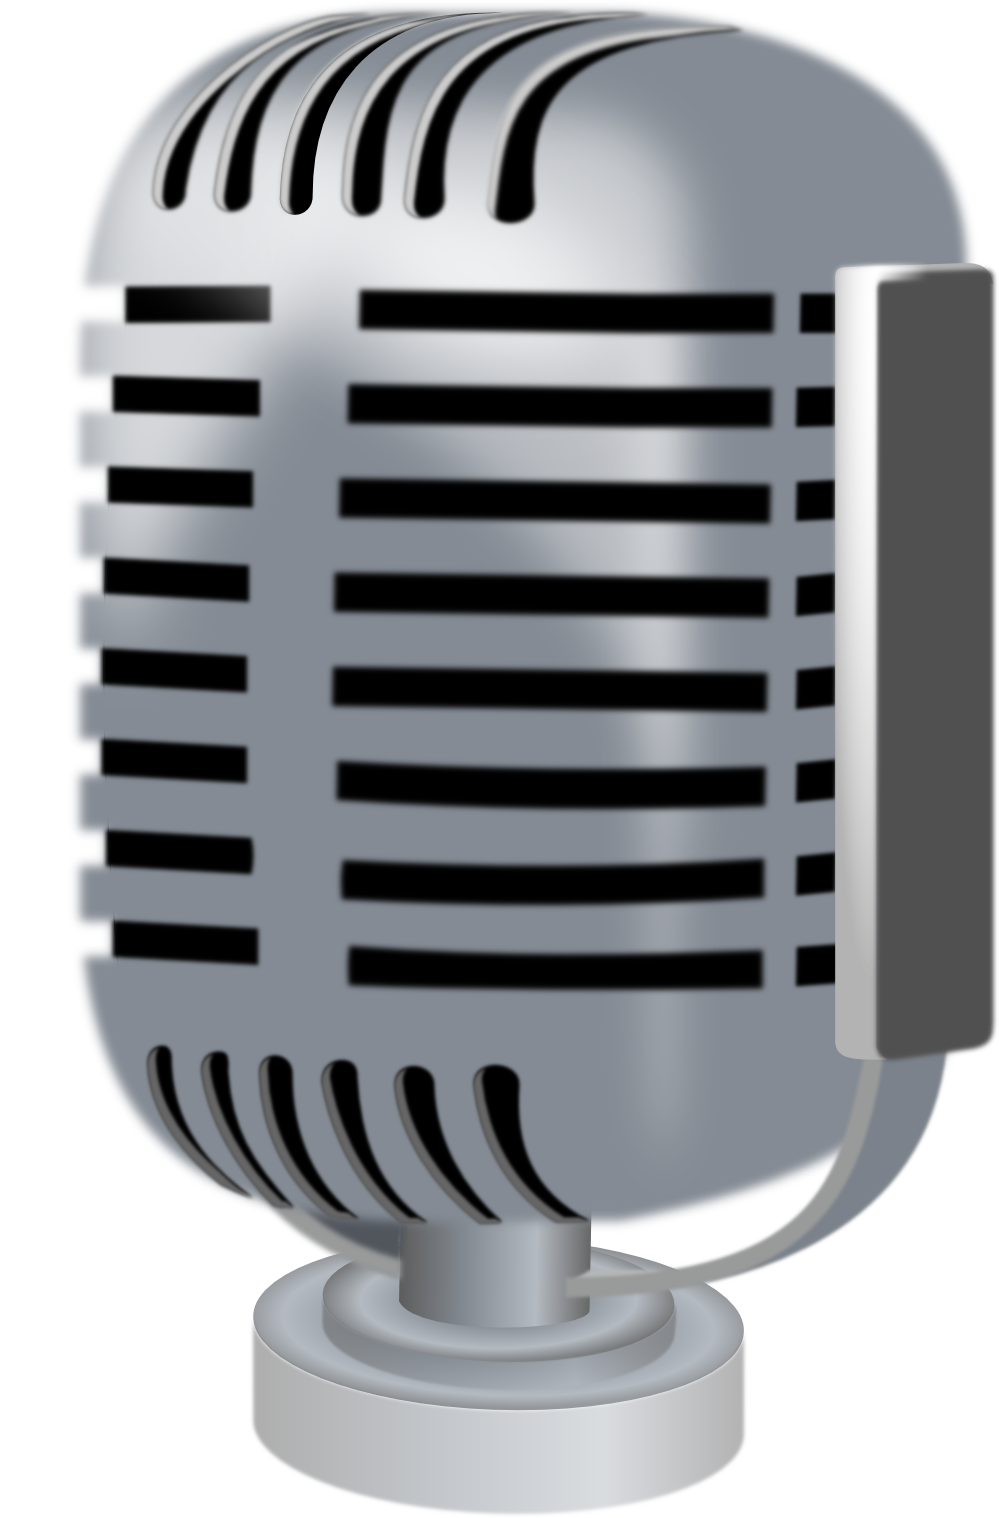 Old Microphone Clip Art Png Images  Pictures - Becuo